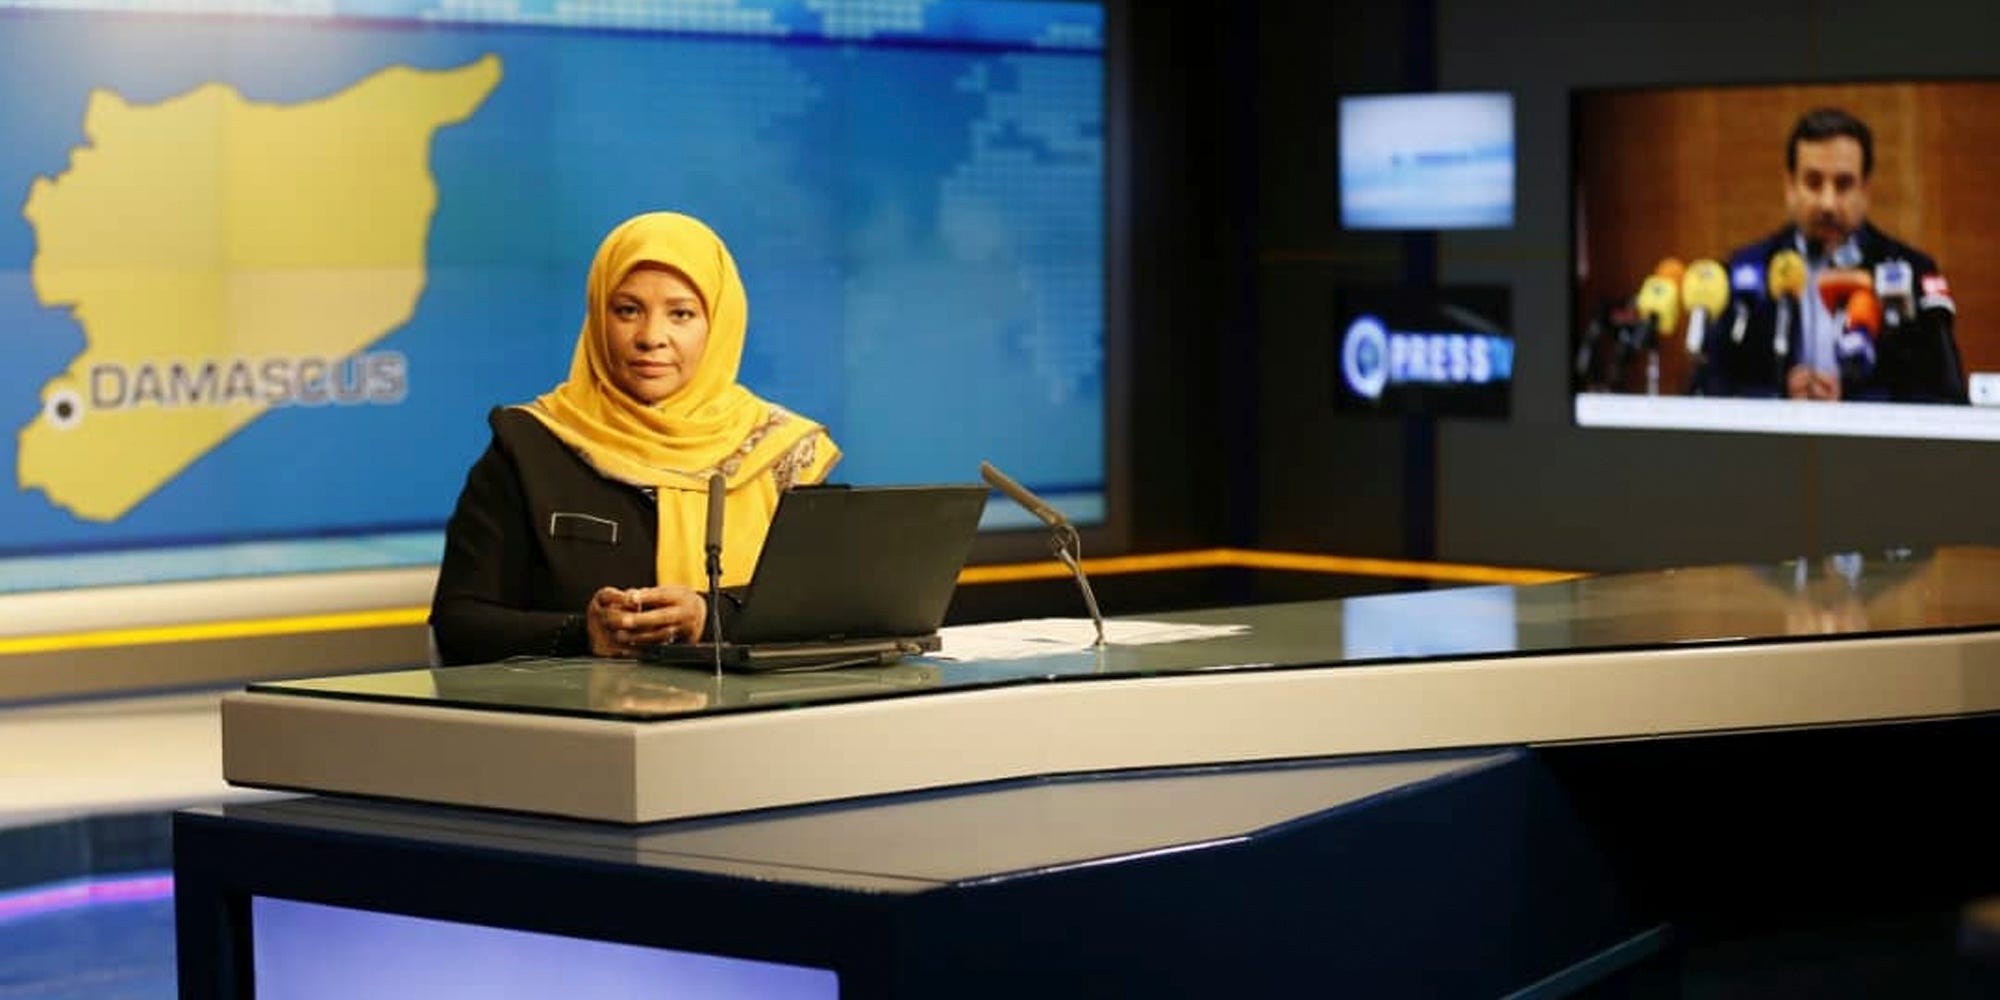 This undated photo provided by Iranian state television's English-language service, Press TV, shows American-born news anchor Marzieh Hashemi at studio in Tehran, Iran.